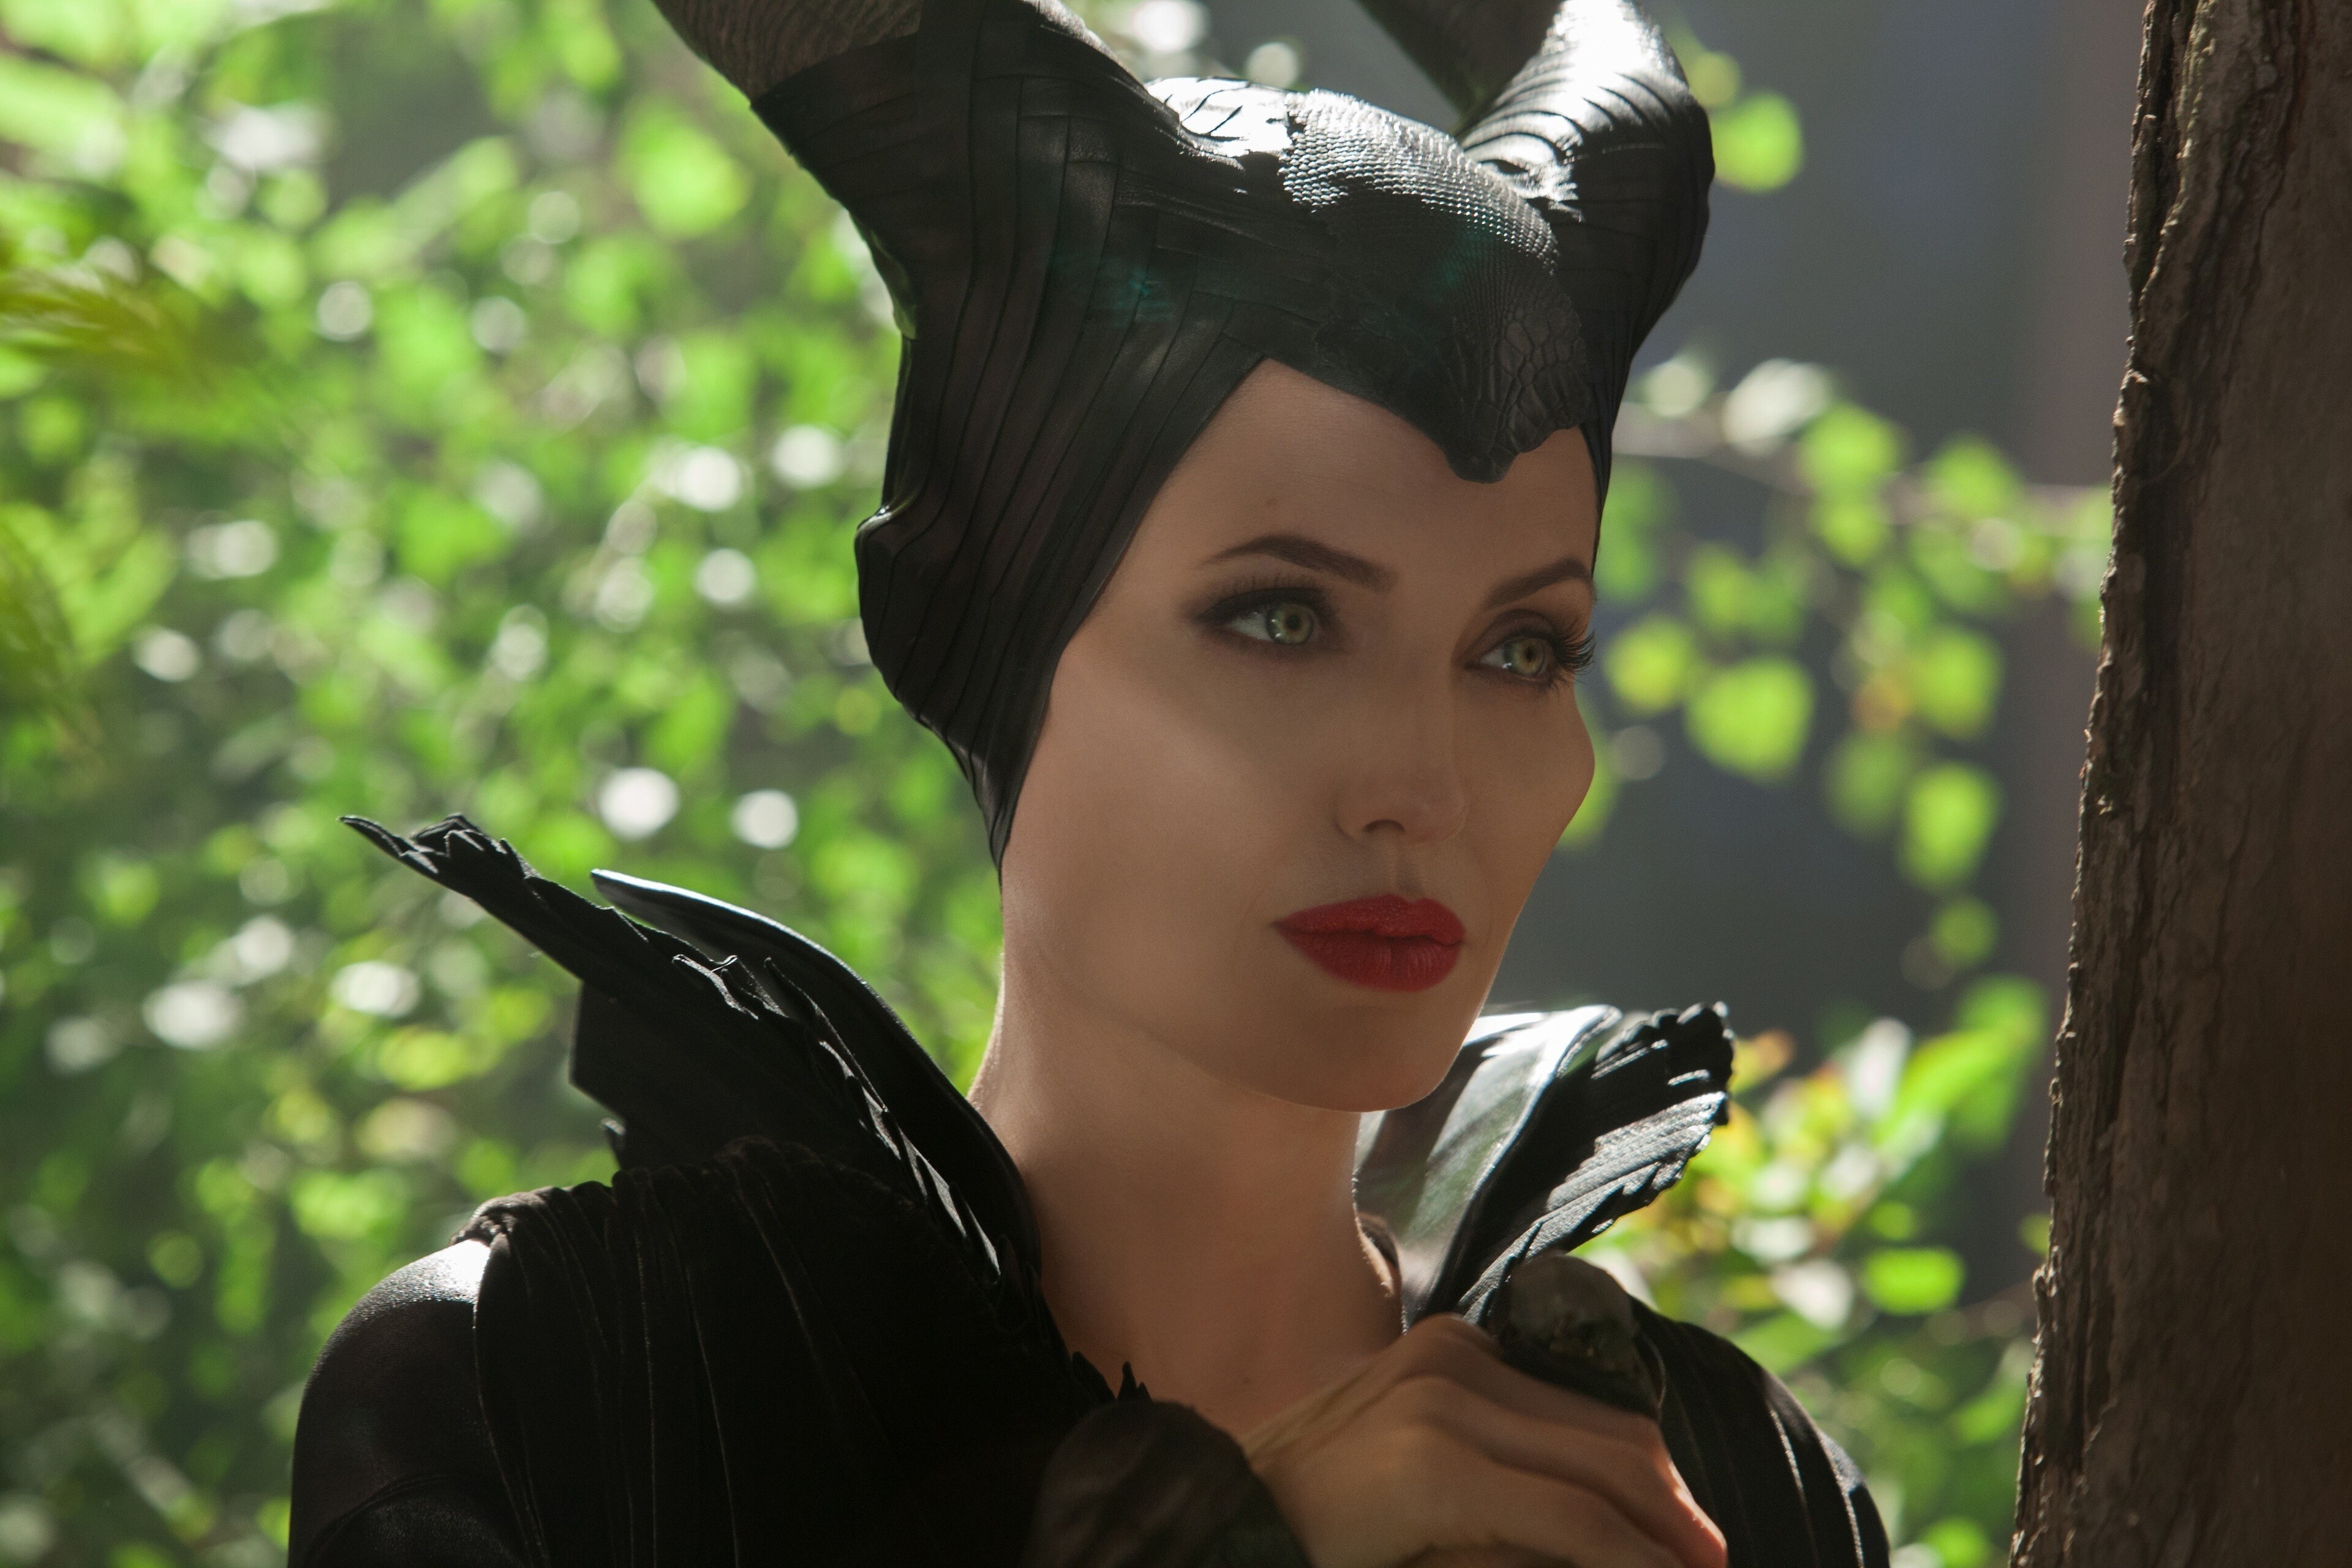 Angelina Jolie as Maleficent in the movie "Maleficent"